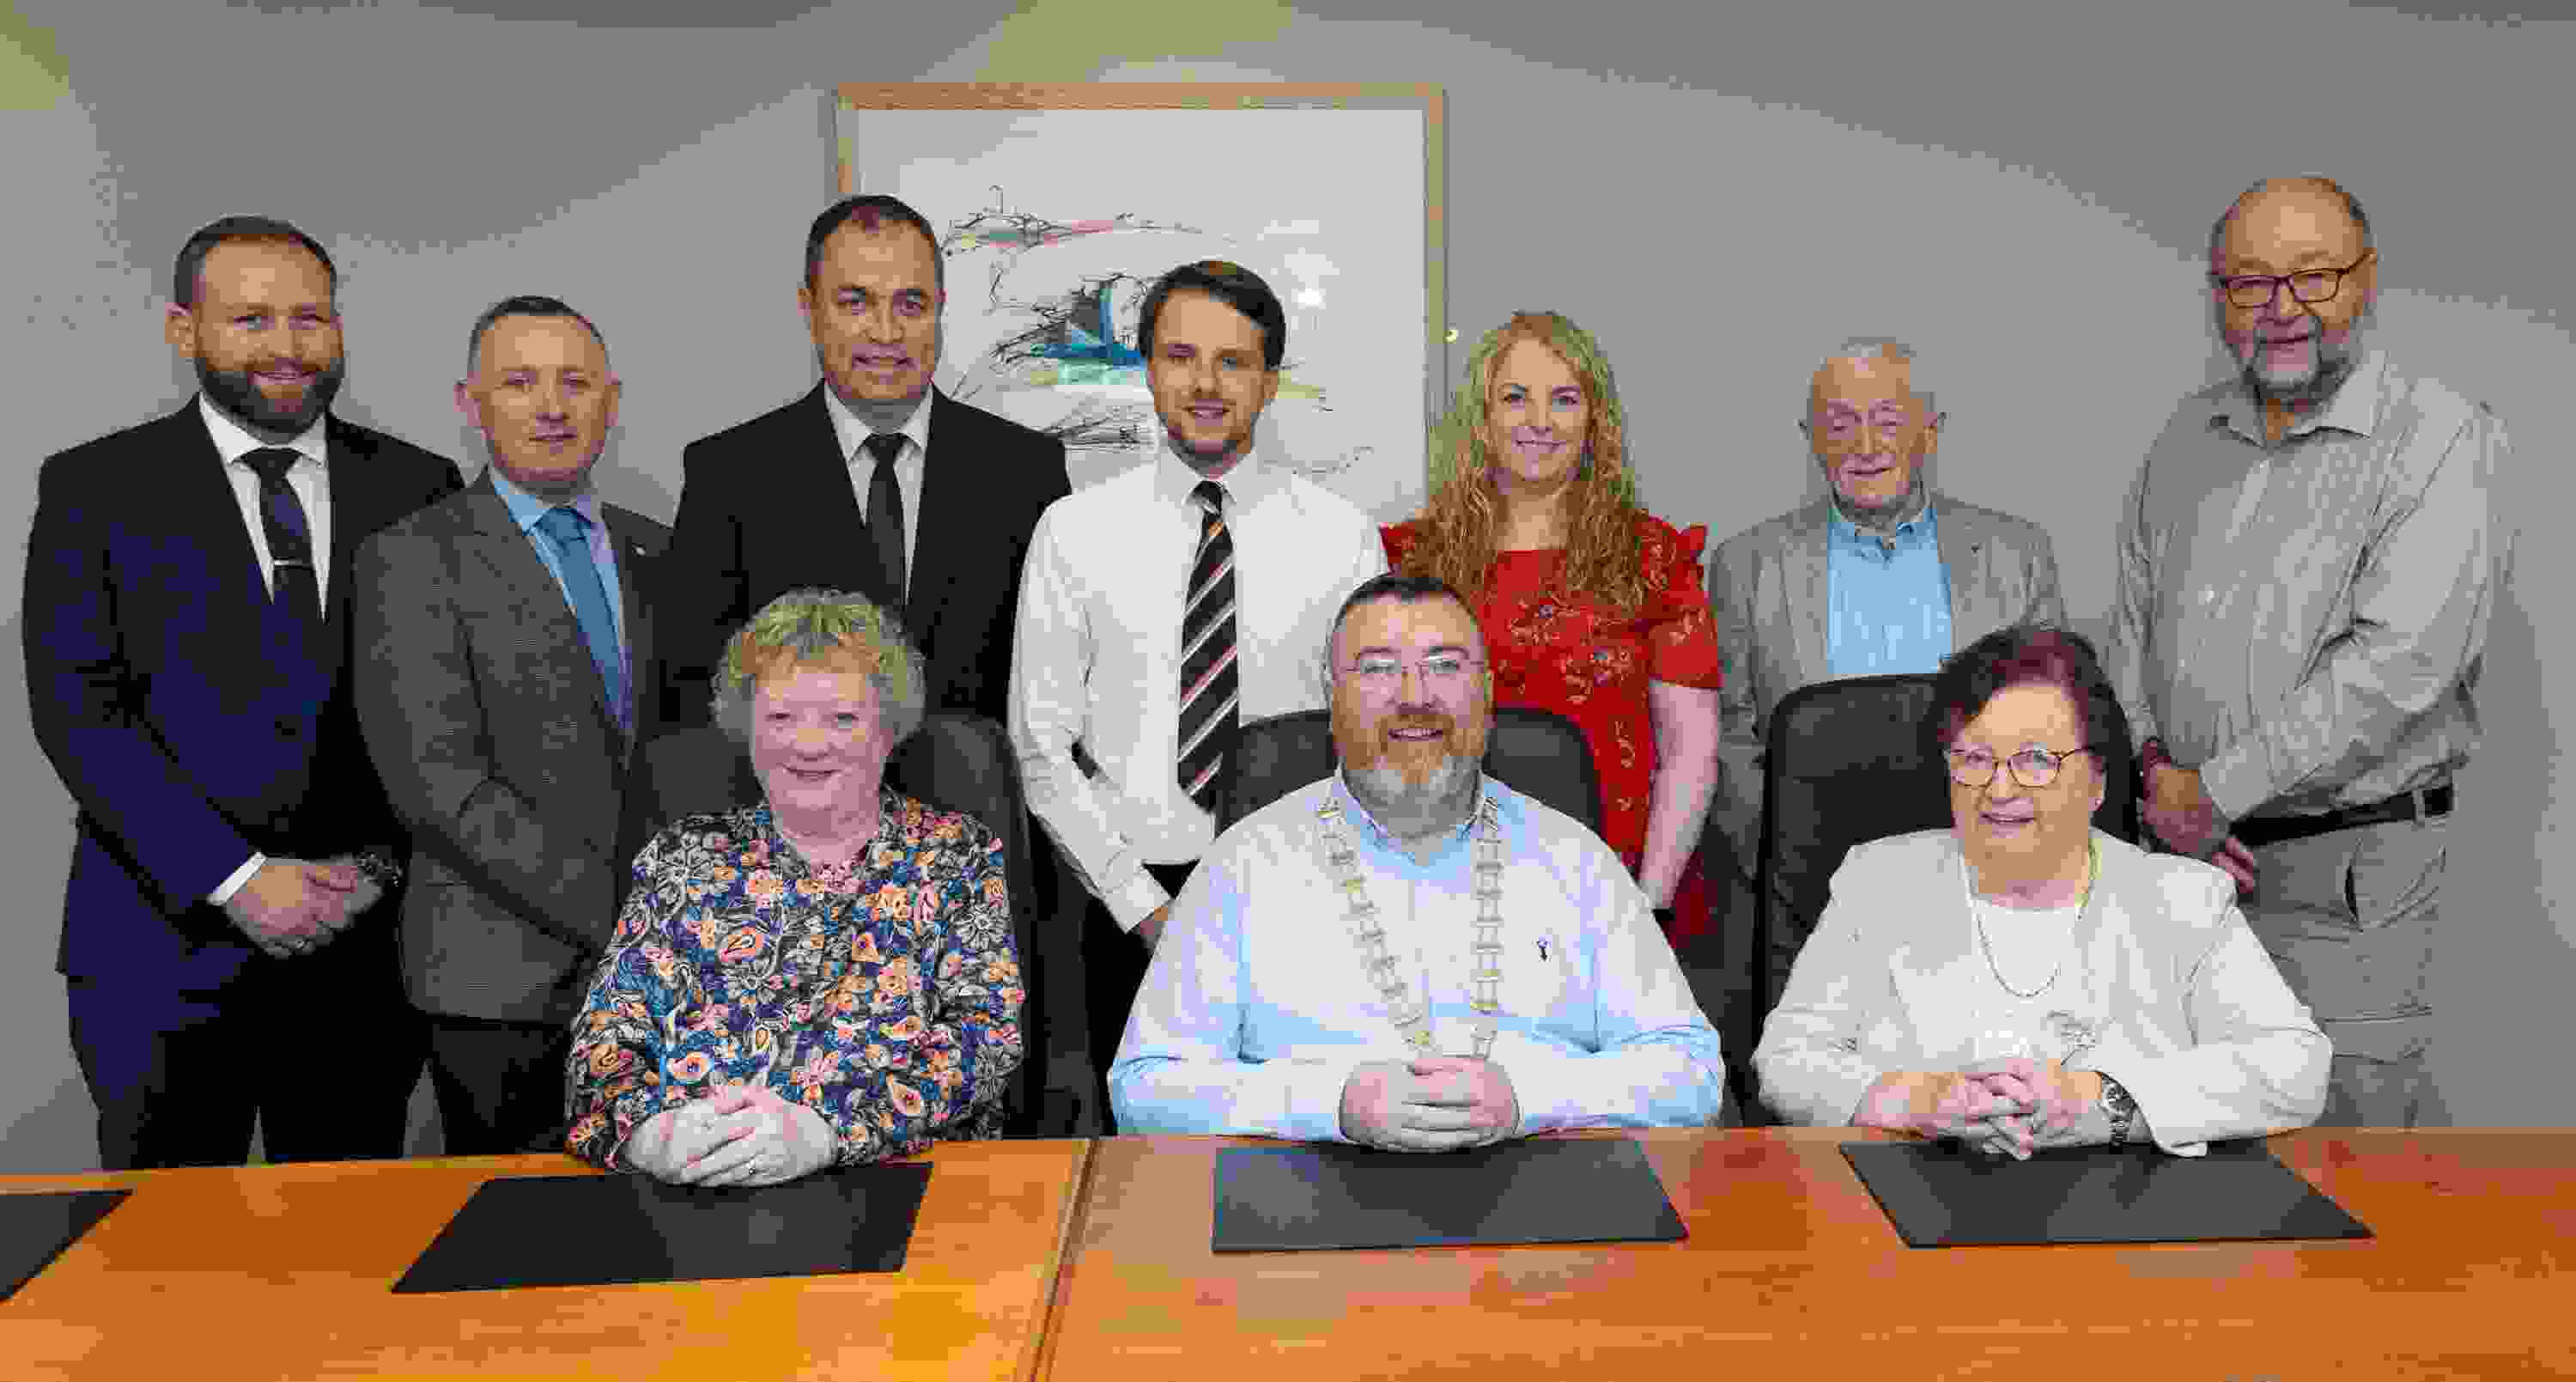 Image of the People First Credit Union board of directors with three people sitting down and seven people standing behind them.